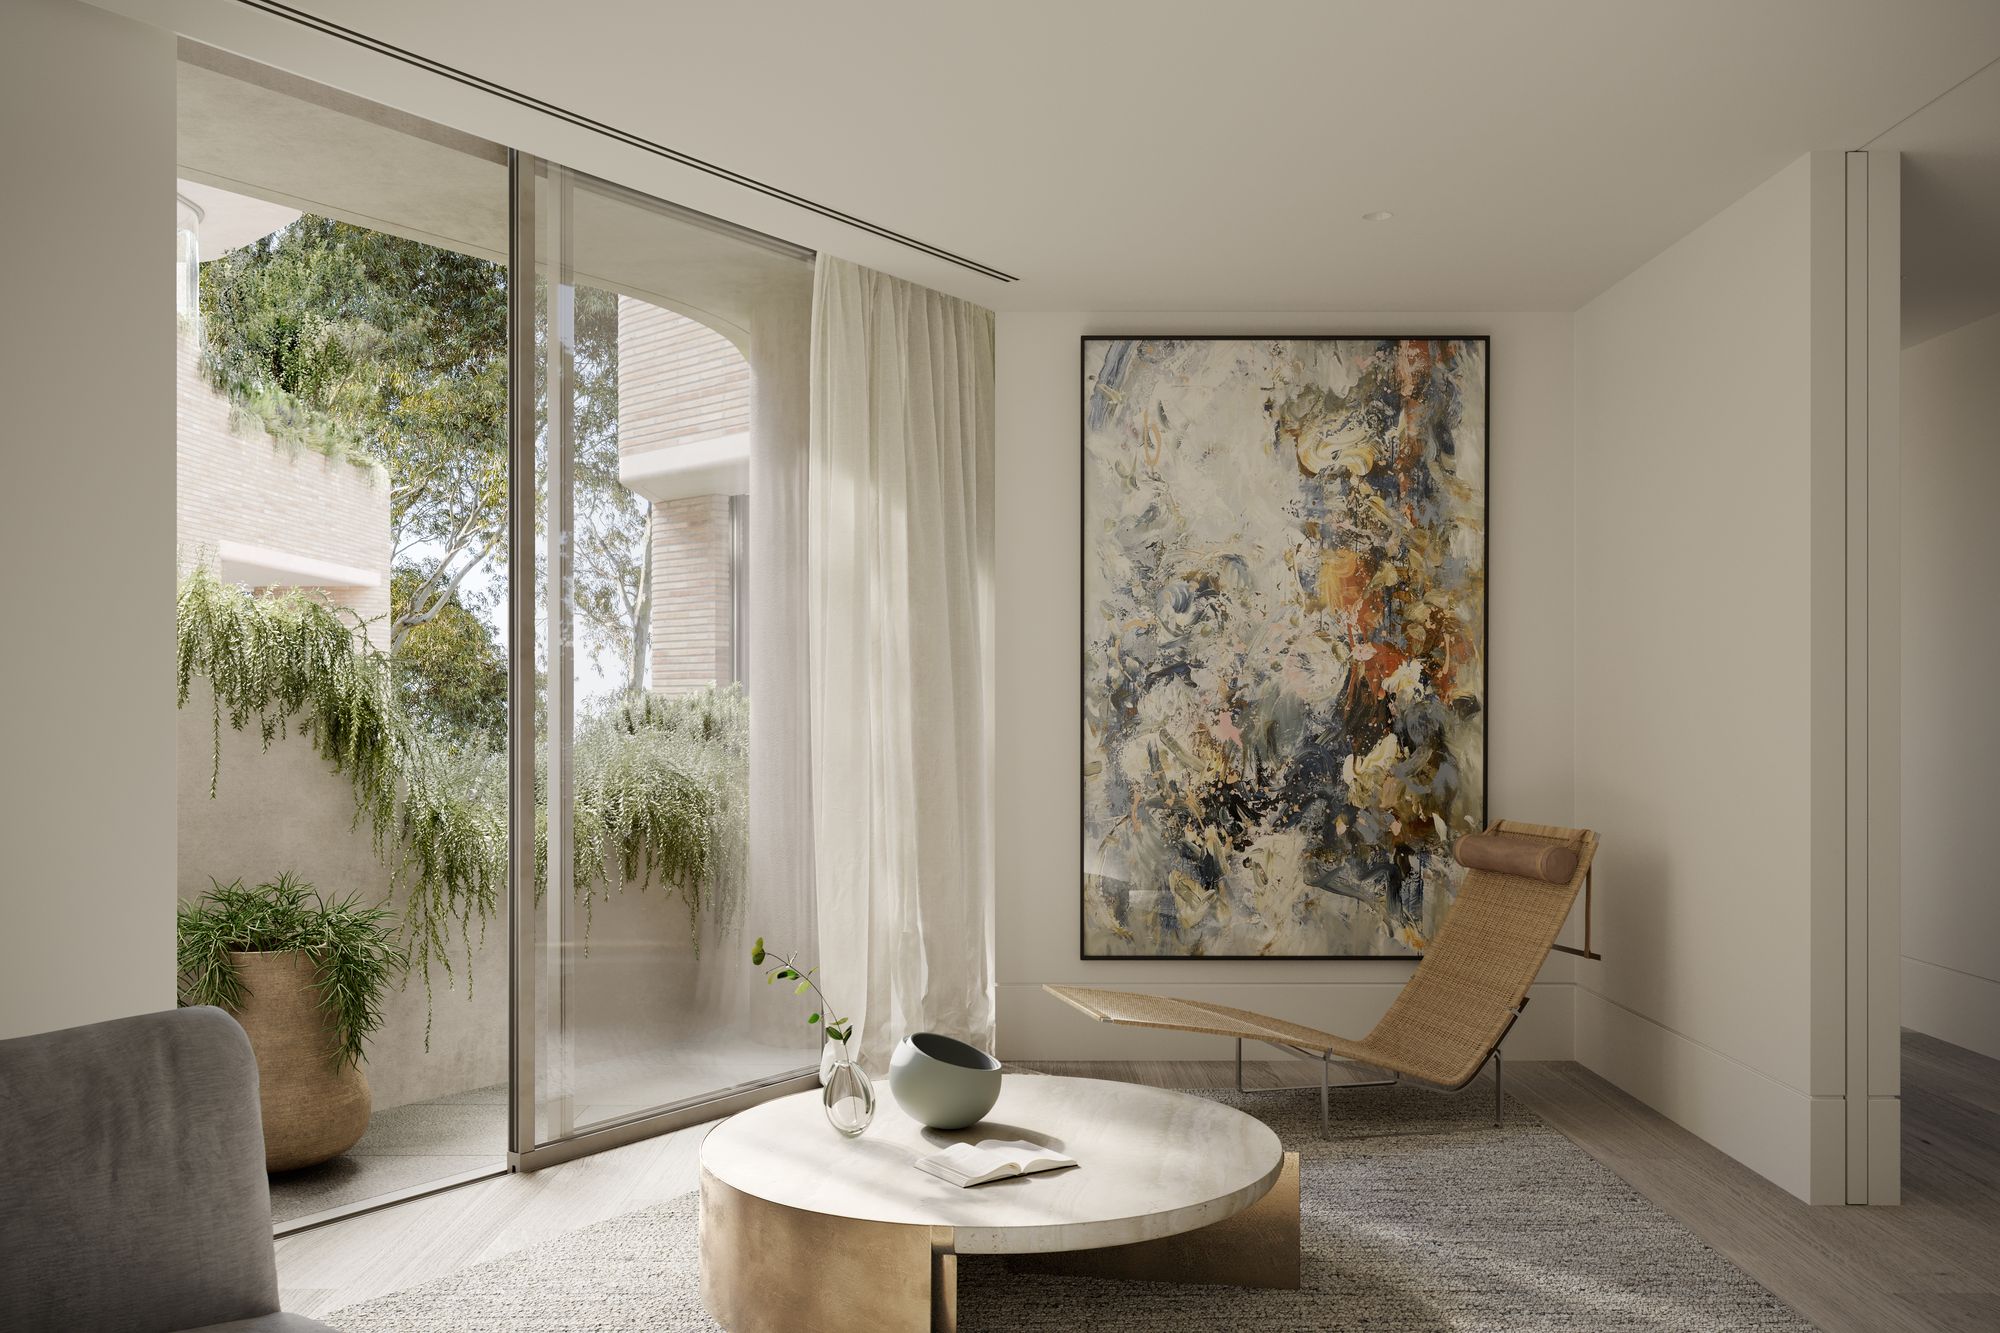  stylish and modern living space with a large abstract painting as the focal point on one wall, adding vibrant colors and texture to the room. A large window with sheer curtains invites natural light in, providing a view of the greenery outside. The furniture includes a simple yet elegant cream-colored round coffee table and a minimalist woven chair that add a natural and organic feel to the space. The room’s design is a harmonious blend of art, comfort, and connection to the outdoors.